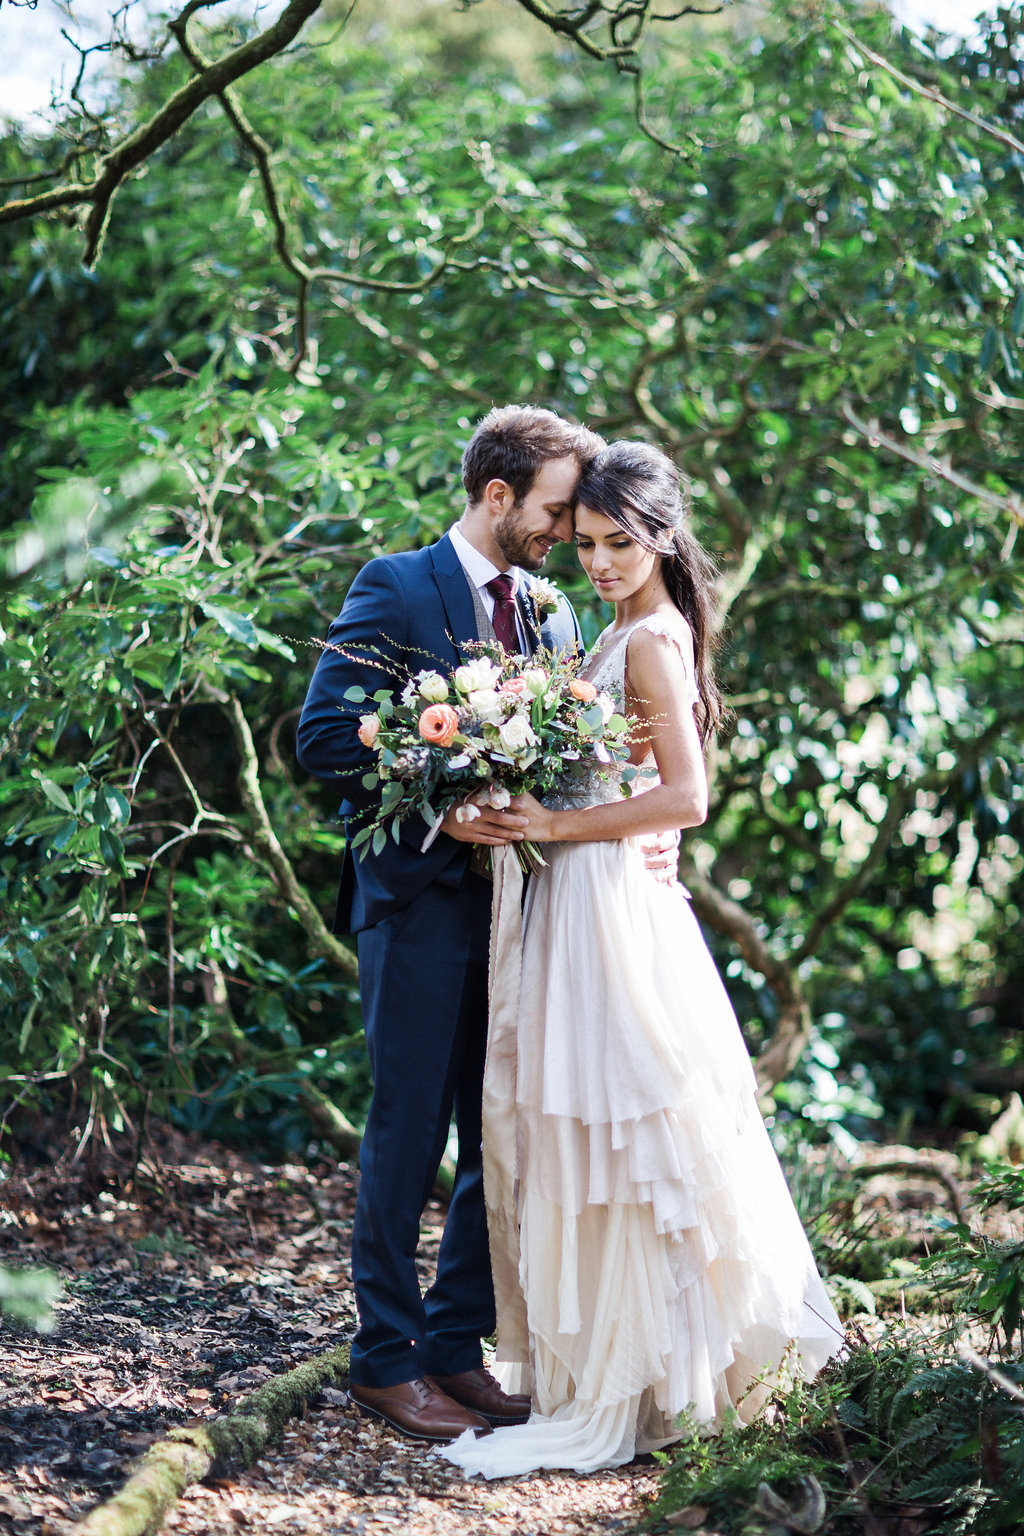 This is another gorgeous gown, a boho-inspired one